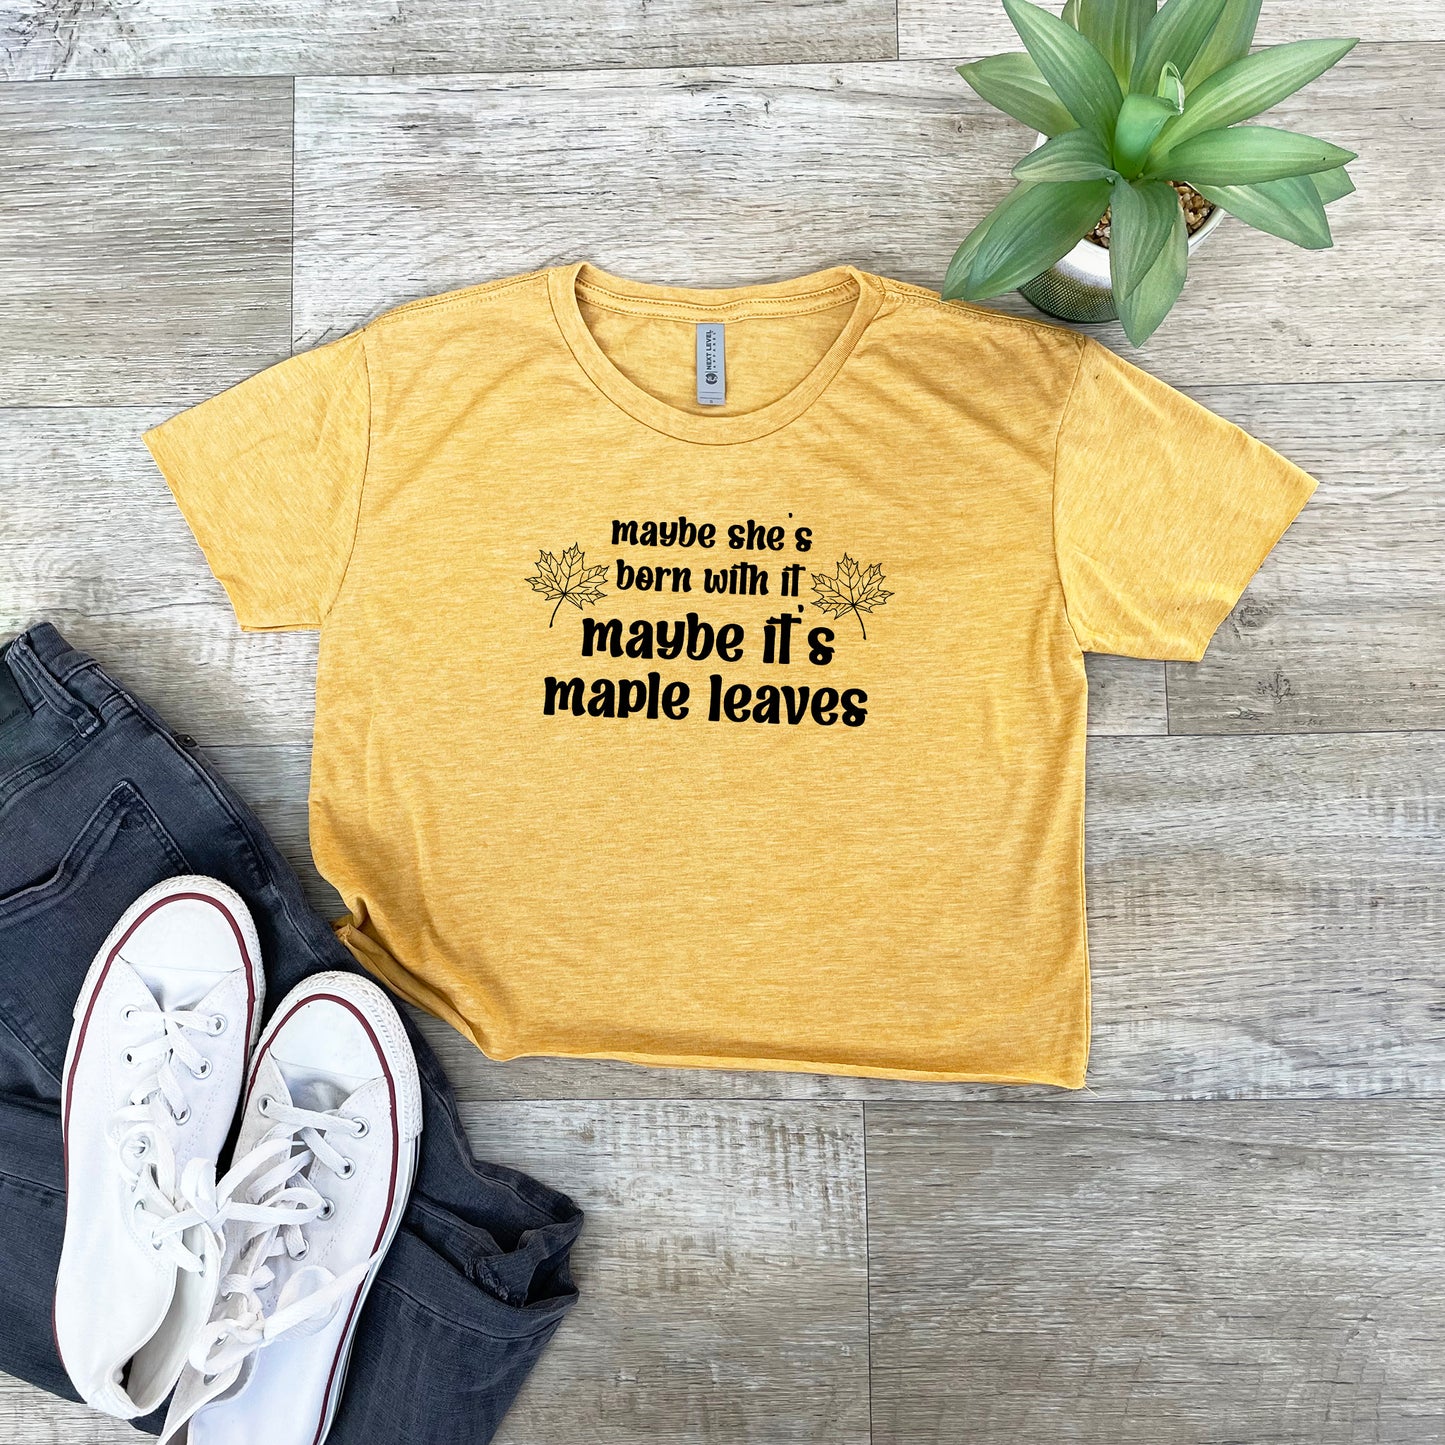 Maybe She's Born With It, Maybe It's Maple Leaves - Women's Crop Tee - Heather Gray or Gold